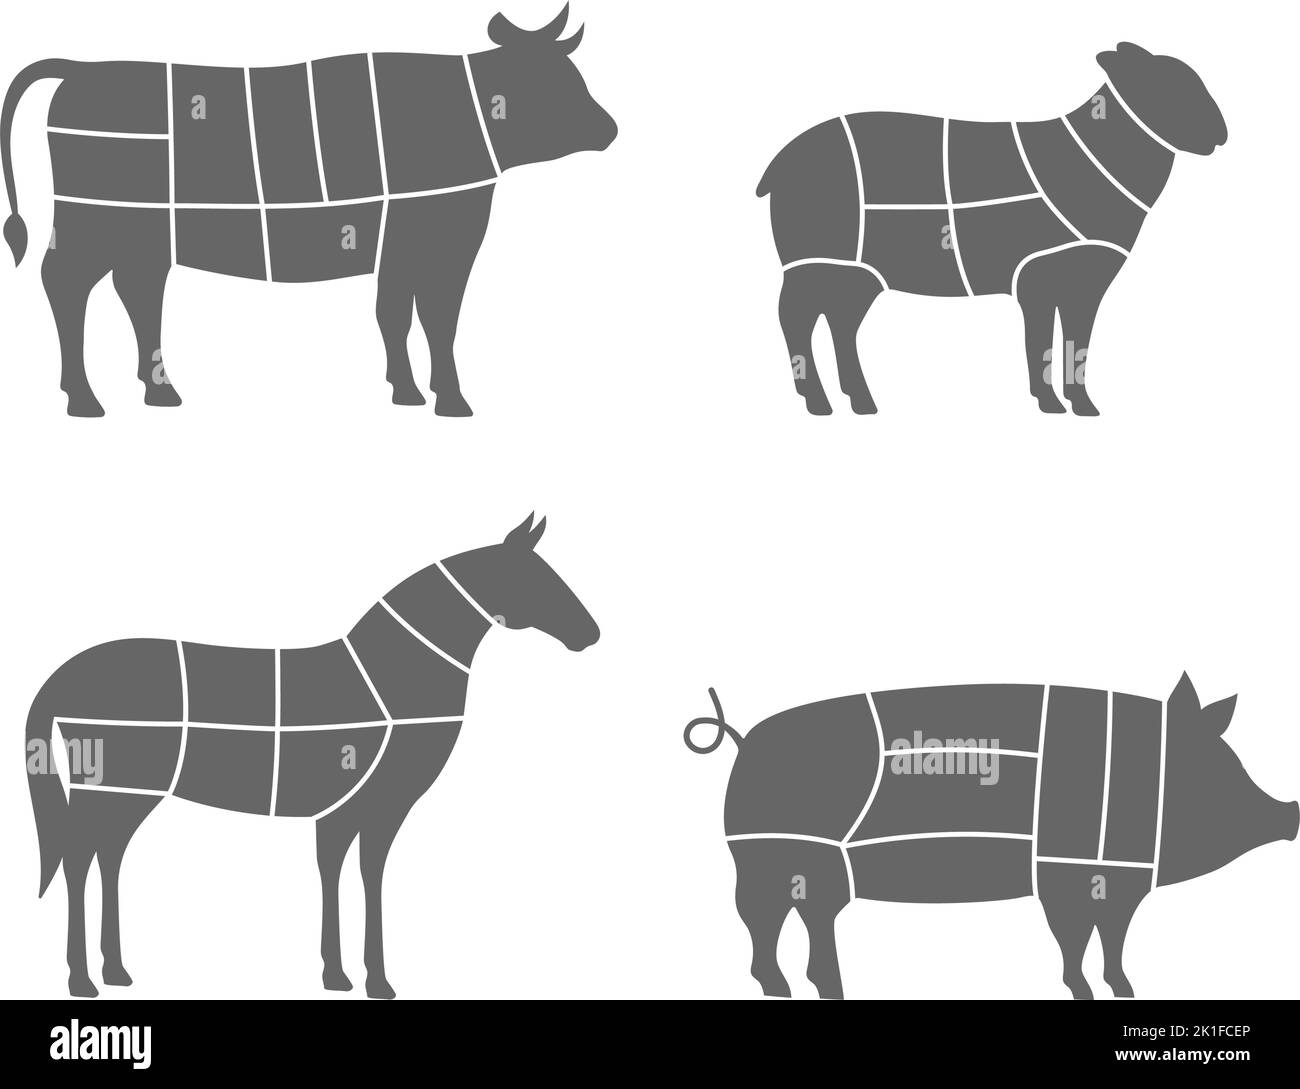 Farm animals scheme cuts. Pig, Horse, Sheep, Cow cuts of meats. Meat cut diagram illustration isolated on white background. Stock Vector